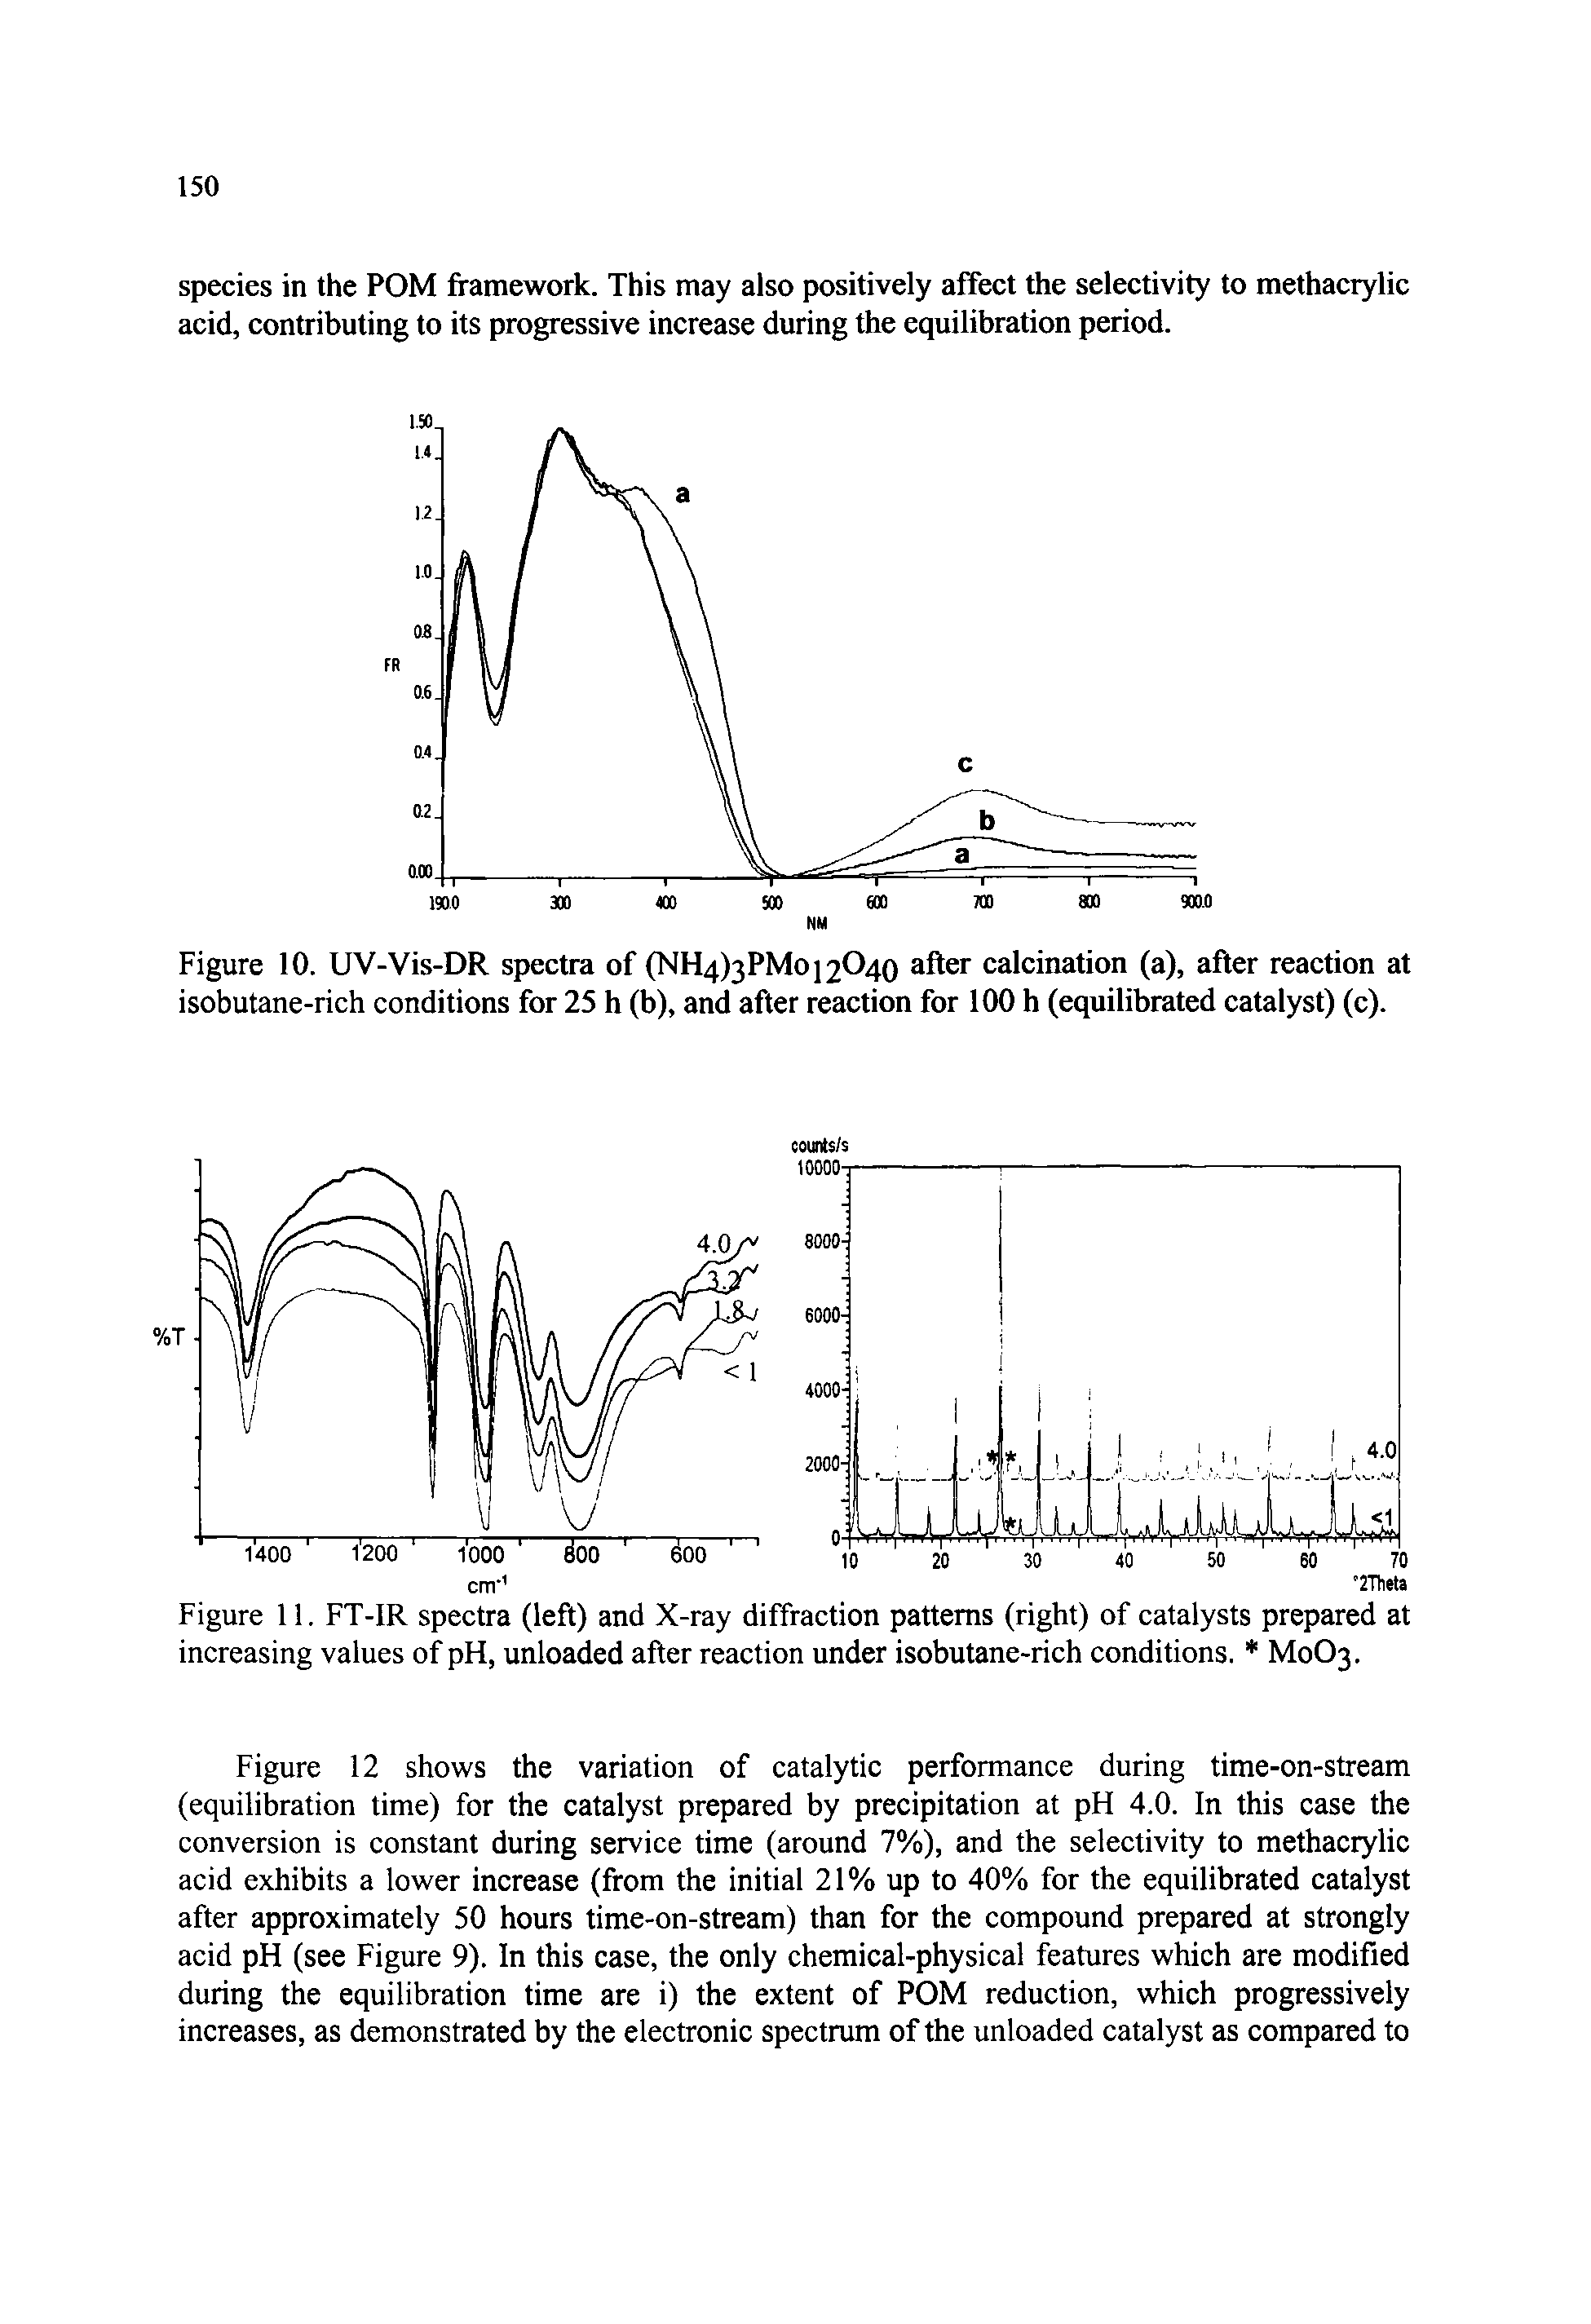 Figure 12 shows the variation of catalytic performance during time-on-stream (equilibration time) for the catalyst prepared by precipitation at pH 4.0. In this case the conversion is constant during service time (around 7%), and the selectivity to methacrylic acid exhibits a lower increase (from the initial 21% up to 40% for the equilibrated catalyst after approximately 50 hours time-on-stream) than for the compound prepared at strongly acid pH (see Figure 9). In this case, the only chemical-physical features which are modified during the equilibration time are i) the extent of POM reduction, which progressively increases, as demonstrated by the electronic spectrum of the unloaded catalyst as compared to...